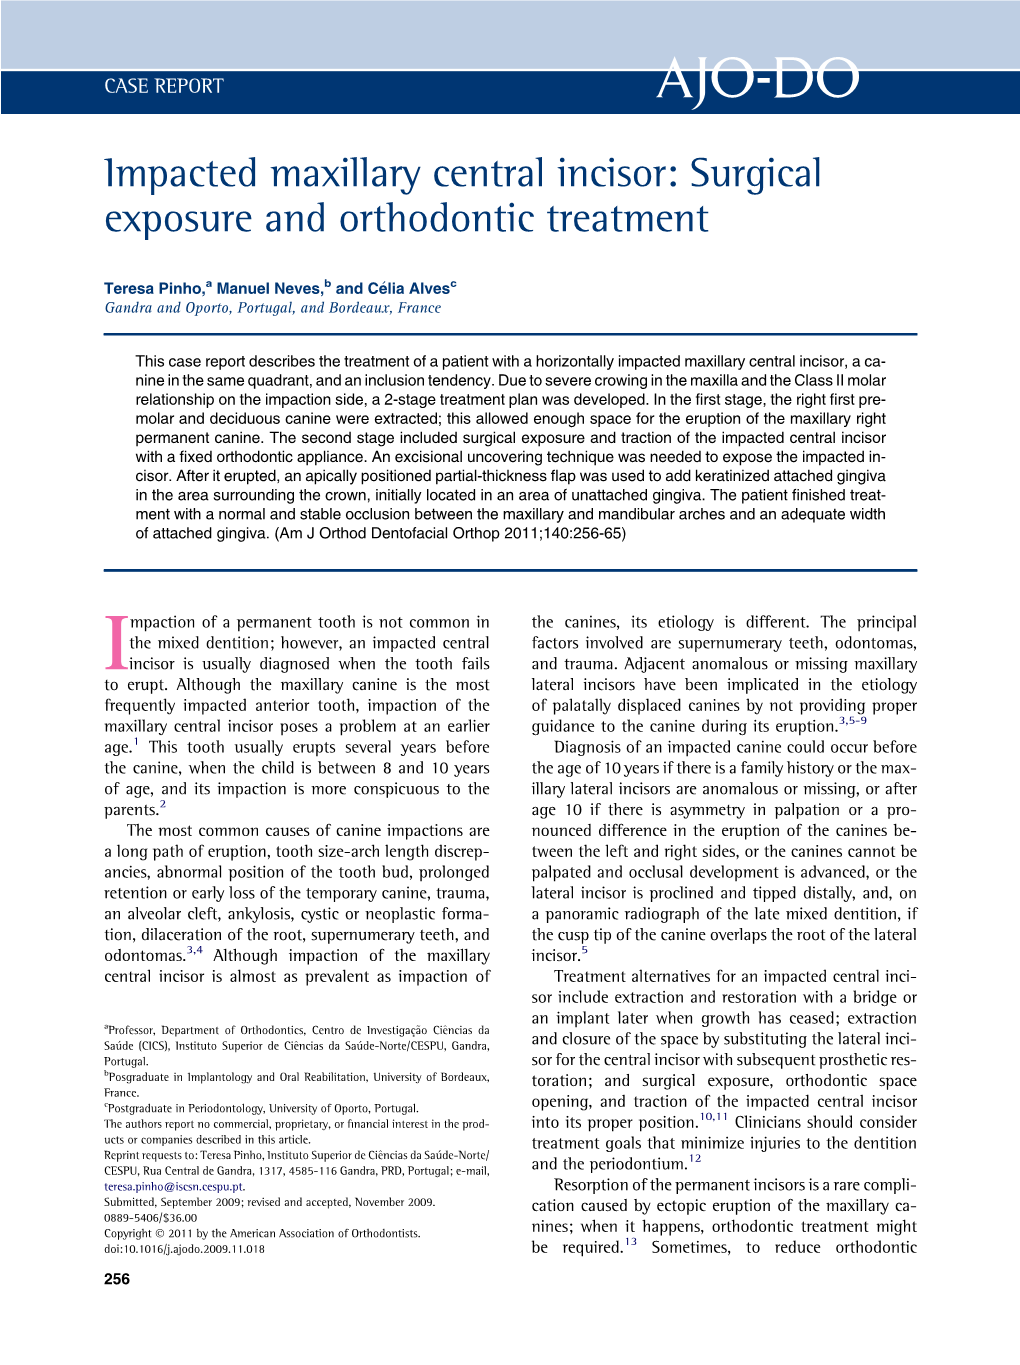 Impacted Maxillary Central Incisor: Surgical Exposure and Orthodontic Treatment